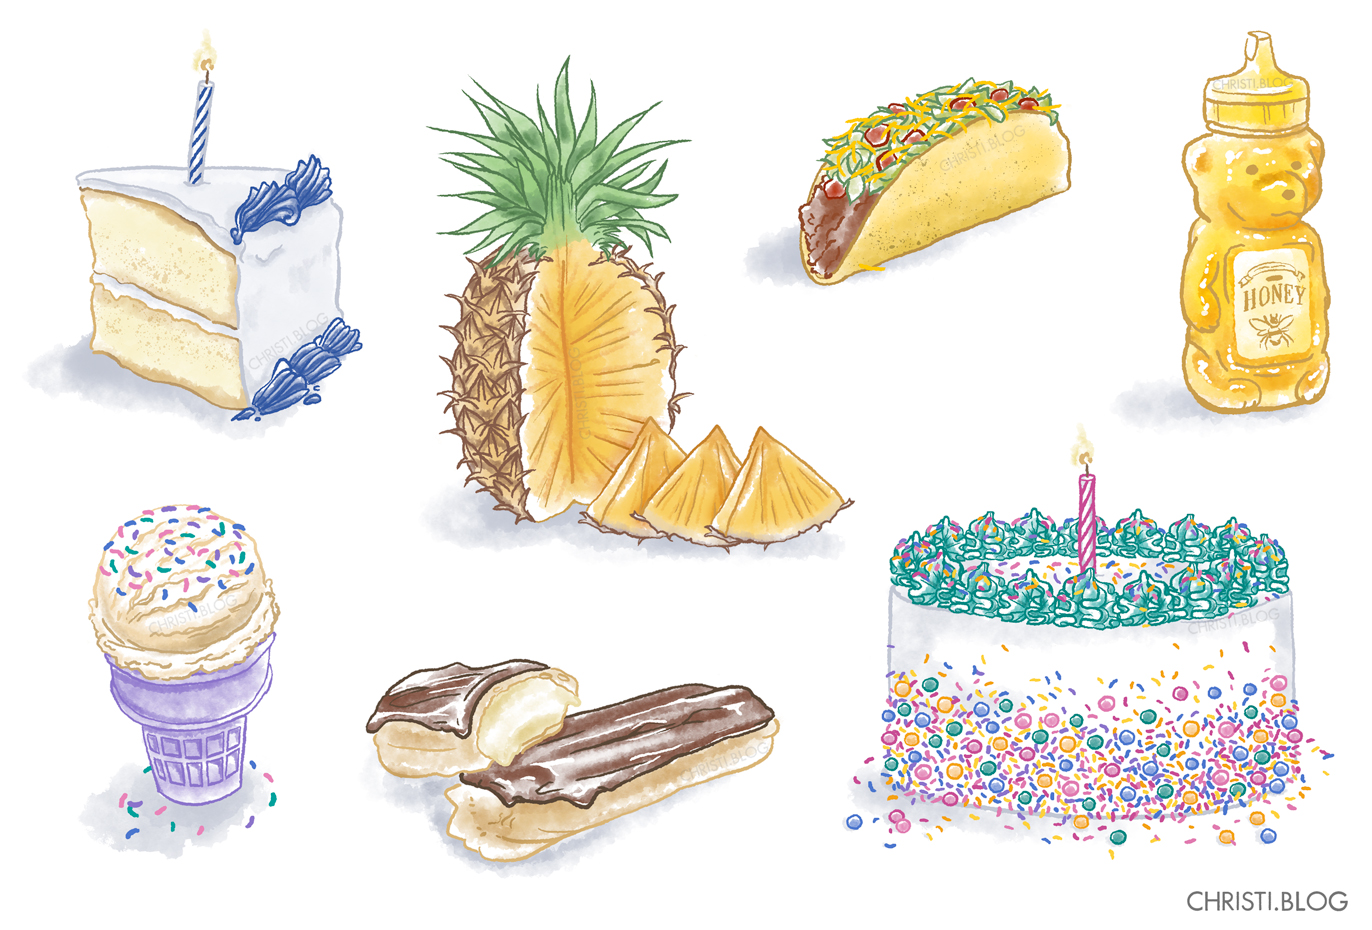 Fun food watercolor style digital illustration with cake slice, pineapple, honey, taco, american style taco, ice cream cone, wafer ice cream cone, eclair, pastry, sprinkle cake